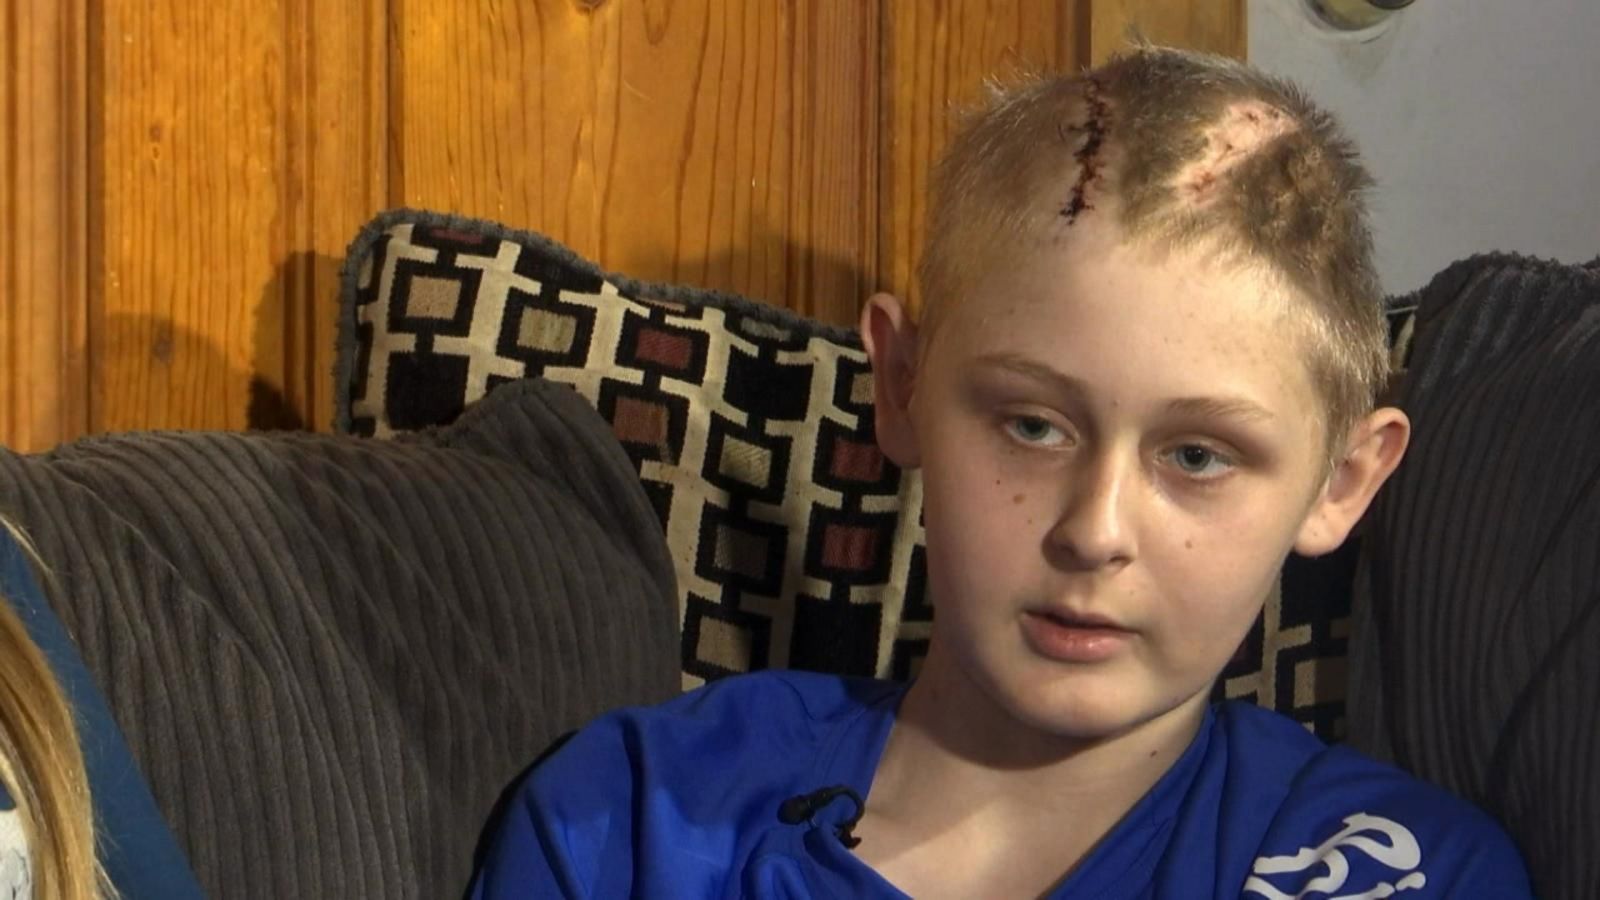 Miraculous recovery for 13-year-old declared brain dead - Good Morning ...